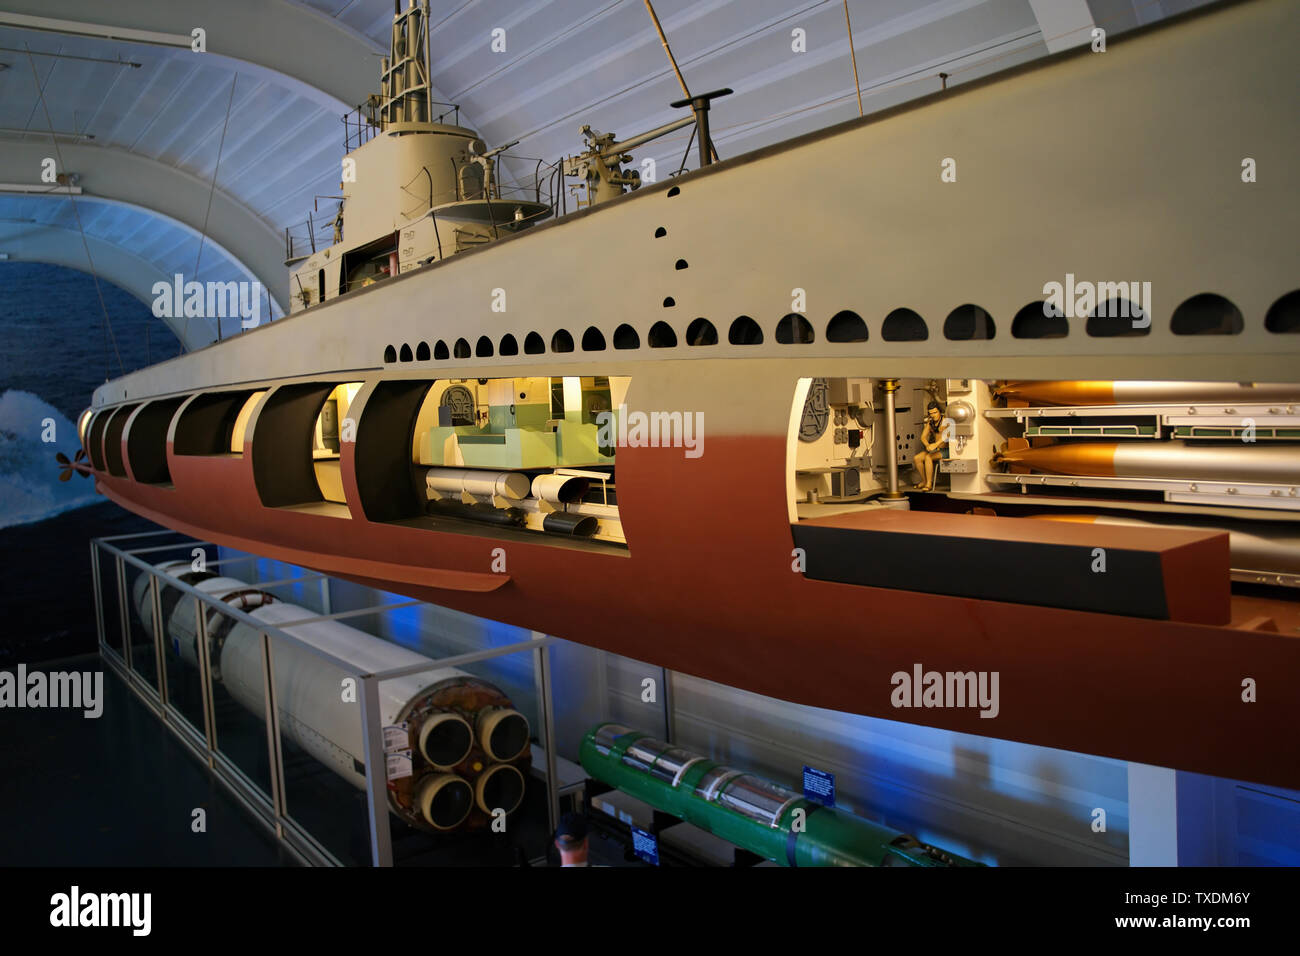 Submarine Force Museum, Groton CT USA, Jun 2019. A cutaway model of a World War II submarine exposing the boats main compartments. Stock Photo